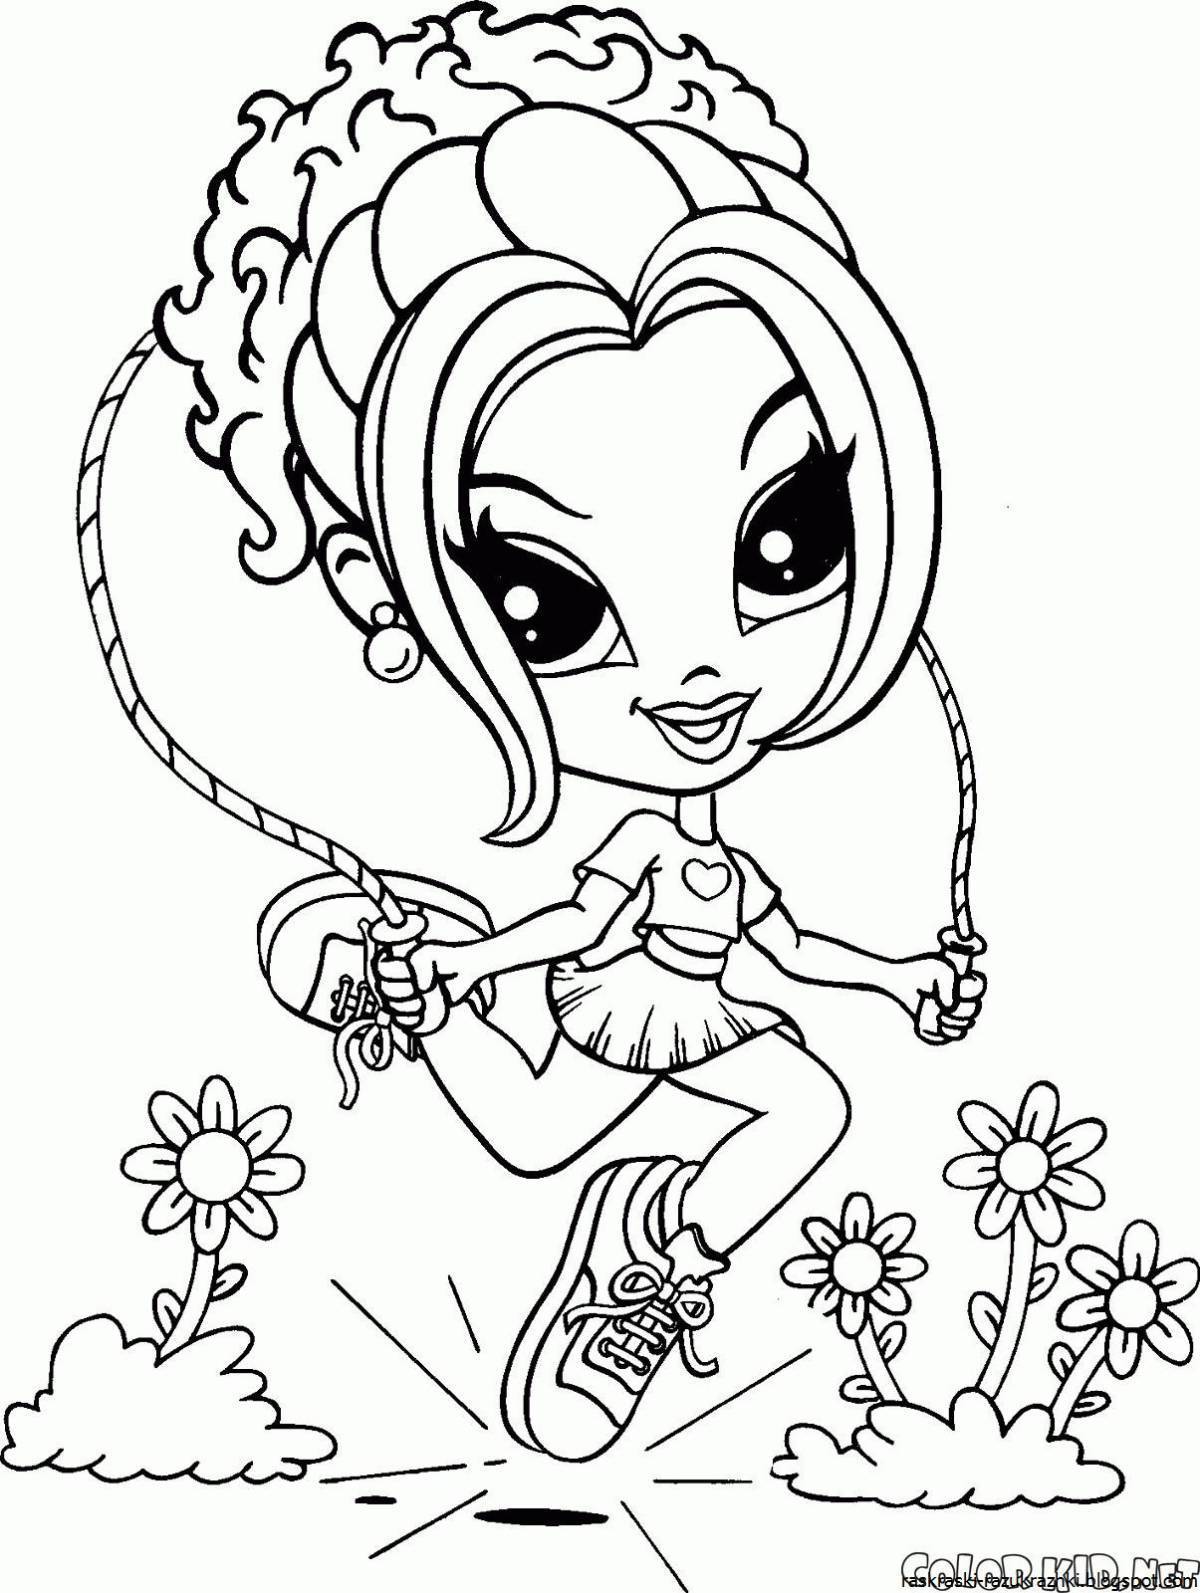 Tempting coloring page turn on